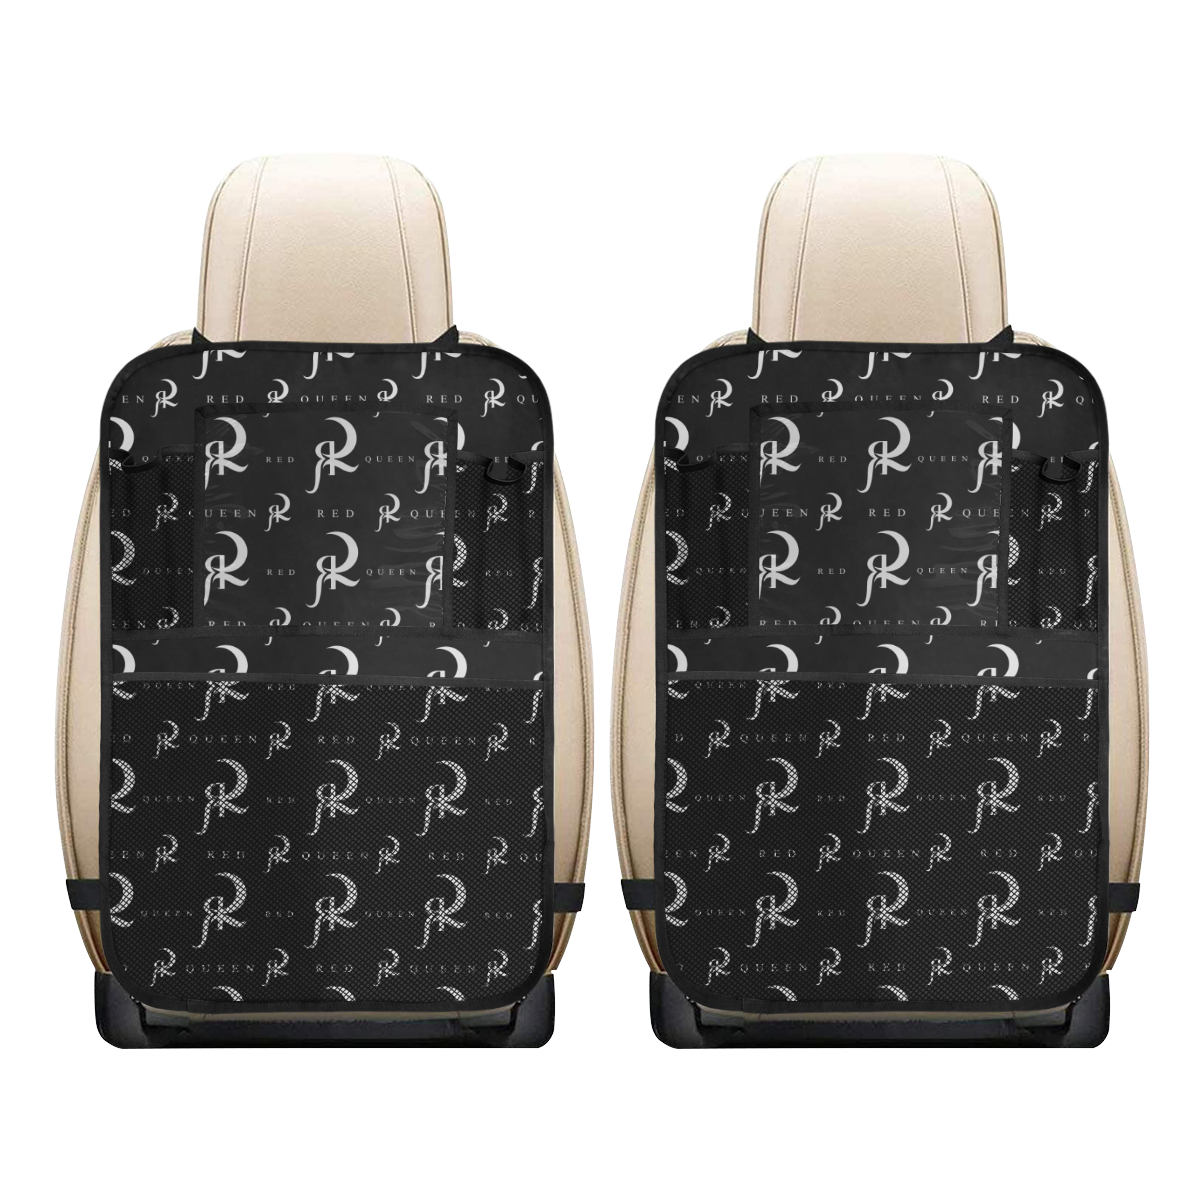 RED QUEEN GREY & BLACK PATTERN ALL OVER Car Seat Back Organizer (2-Pack)